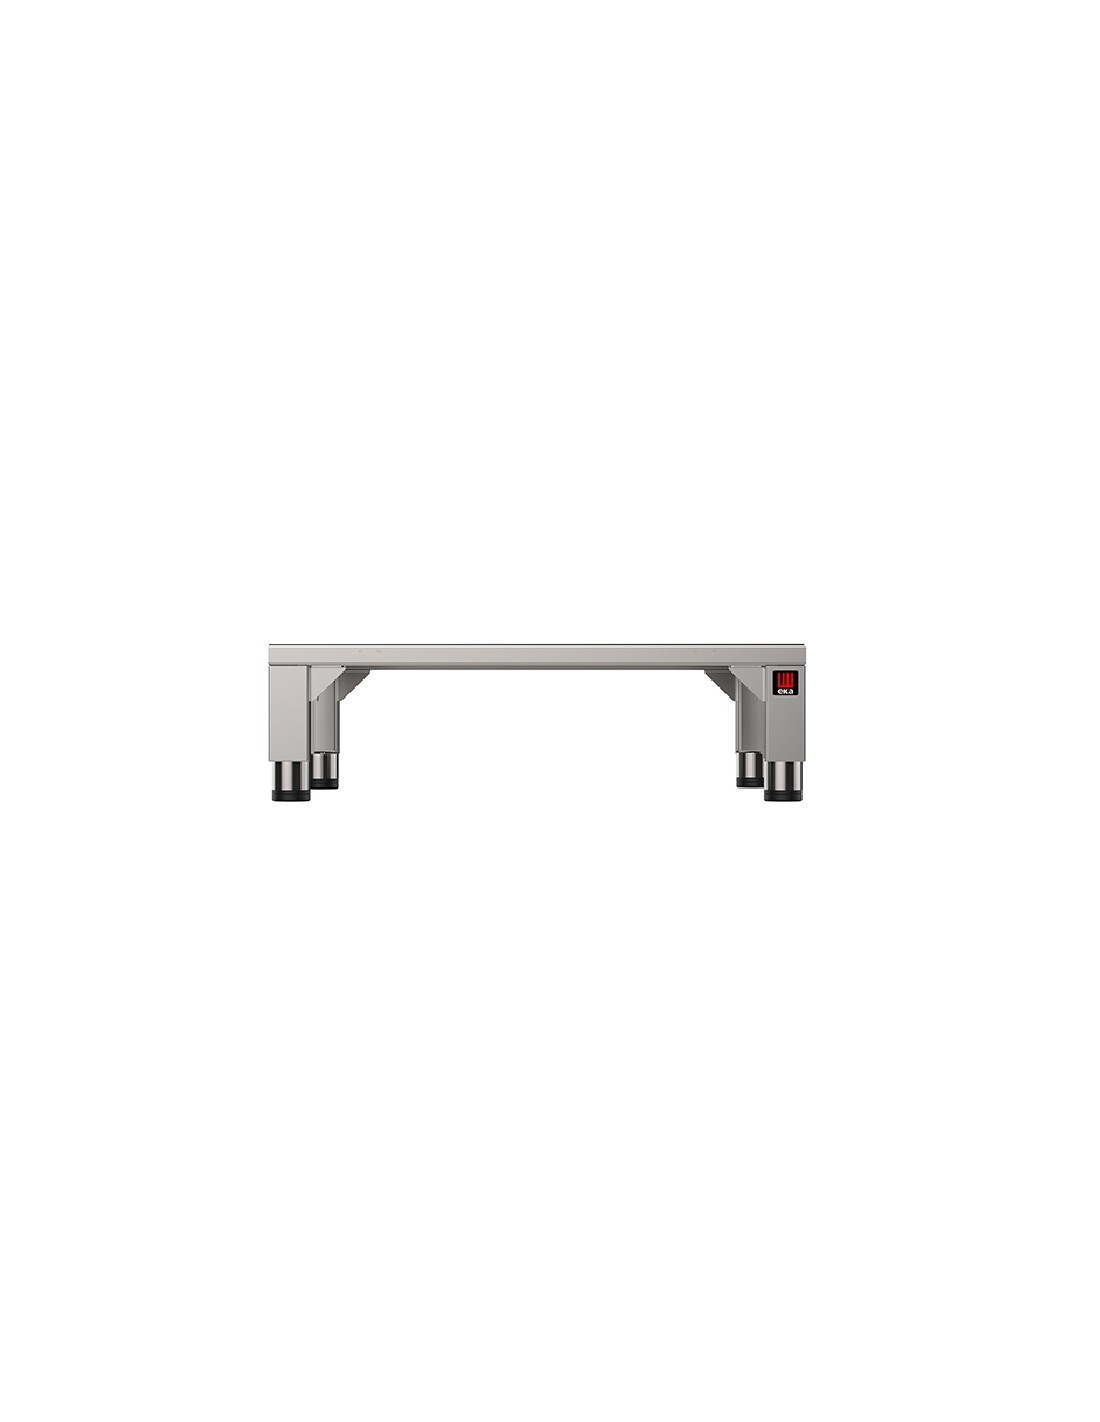 Fixed table - Acciaio inox AISI 430 - Supplies for ovens 5/7/11 trays - Size cm 73 x 60 x 22h